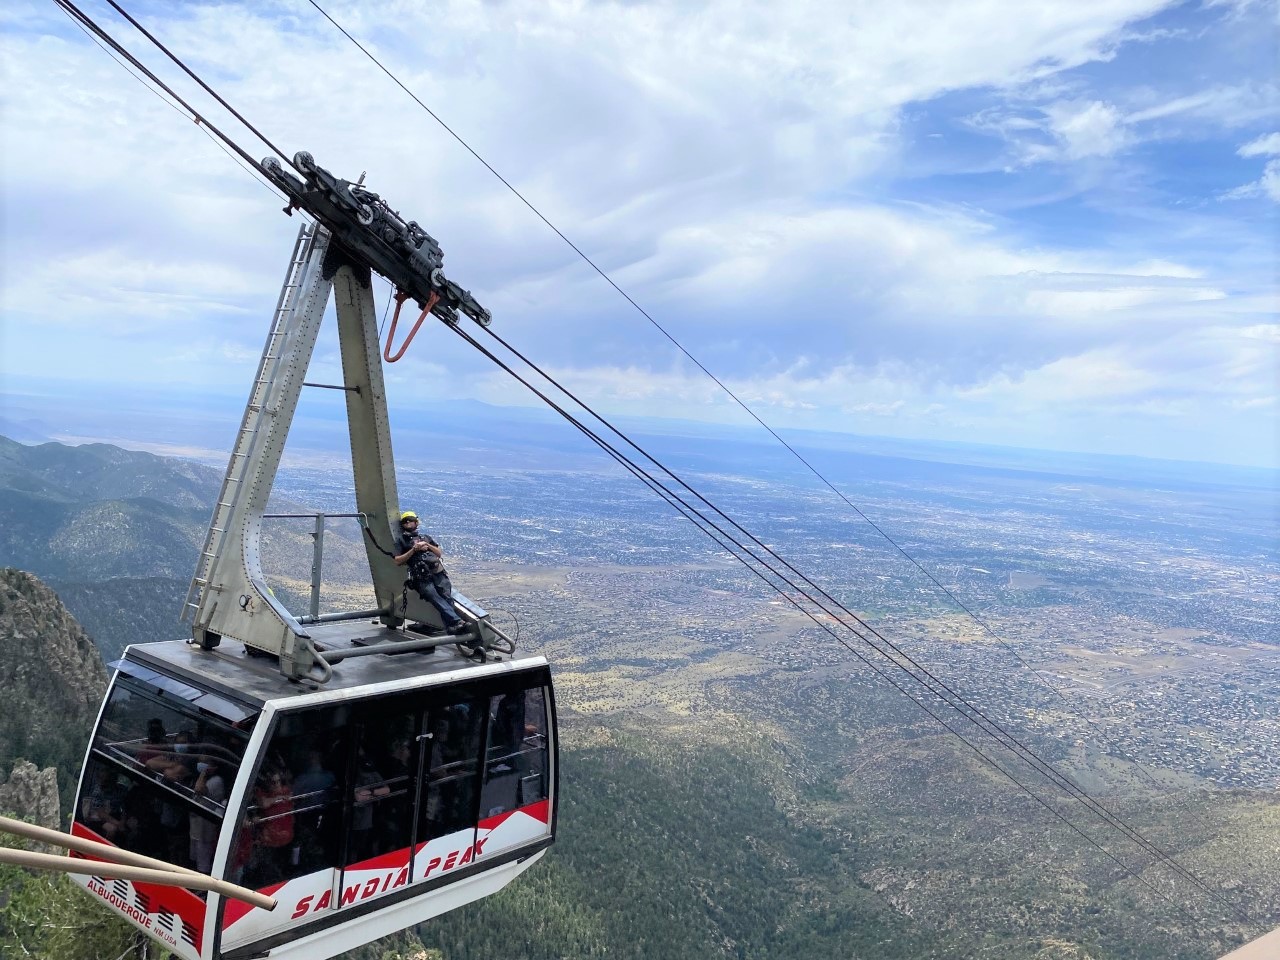 The Sandia Peak Tramcar, the cables, the view of Albuquerque, & a worker riding on top of the tramcar.